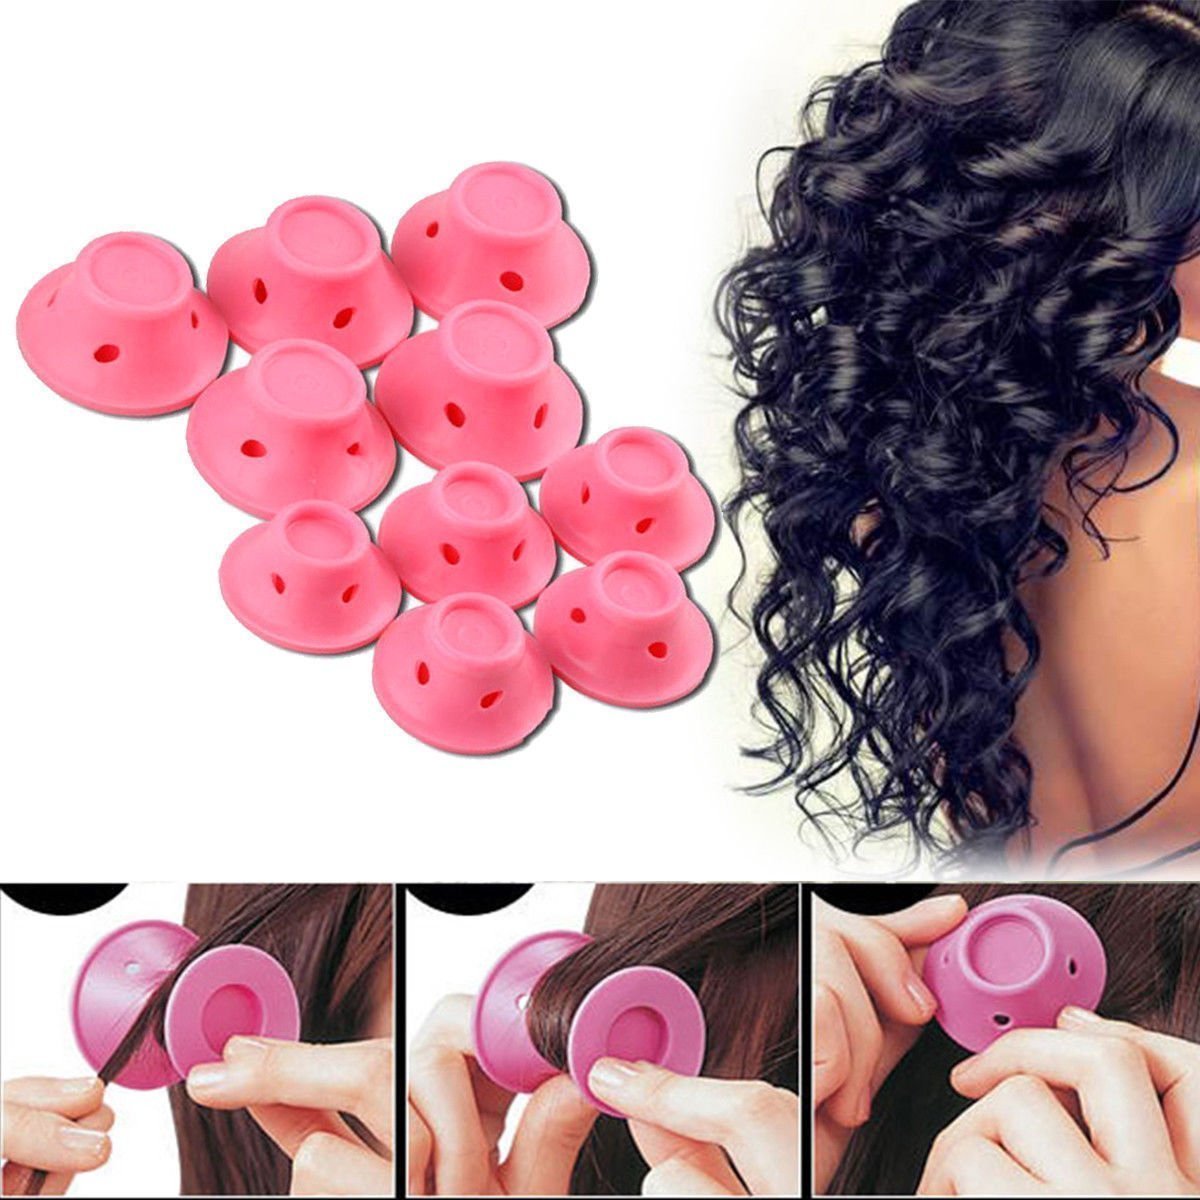 10 pcs. Silicone Hair Curlers